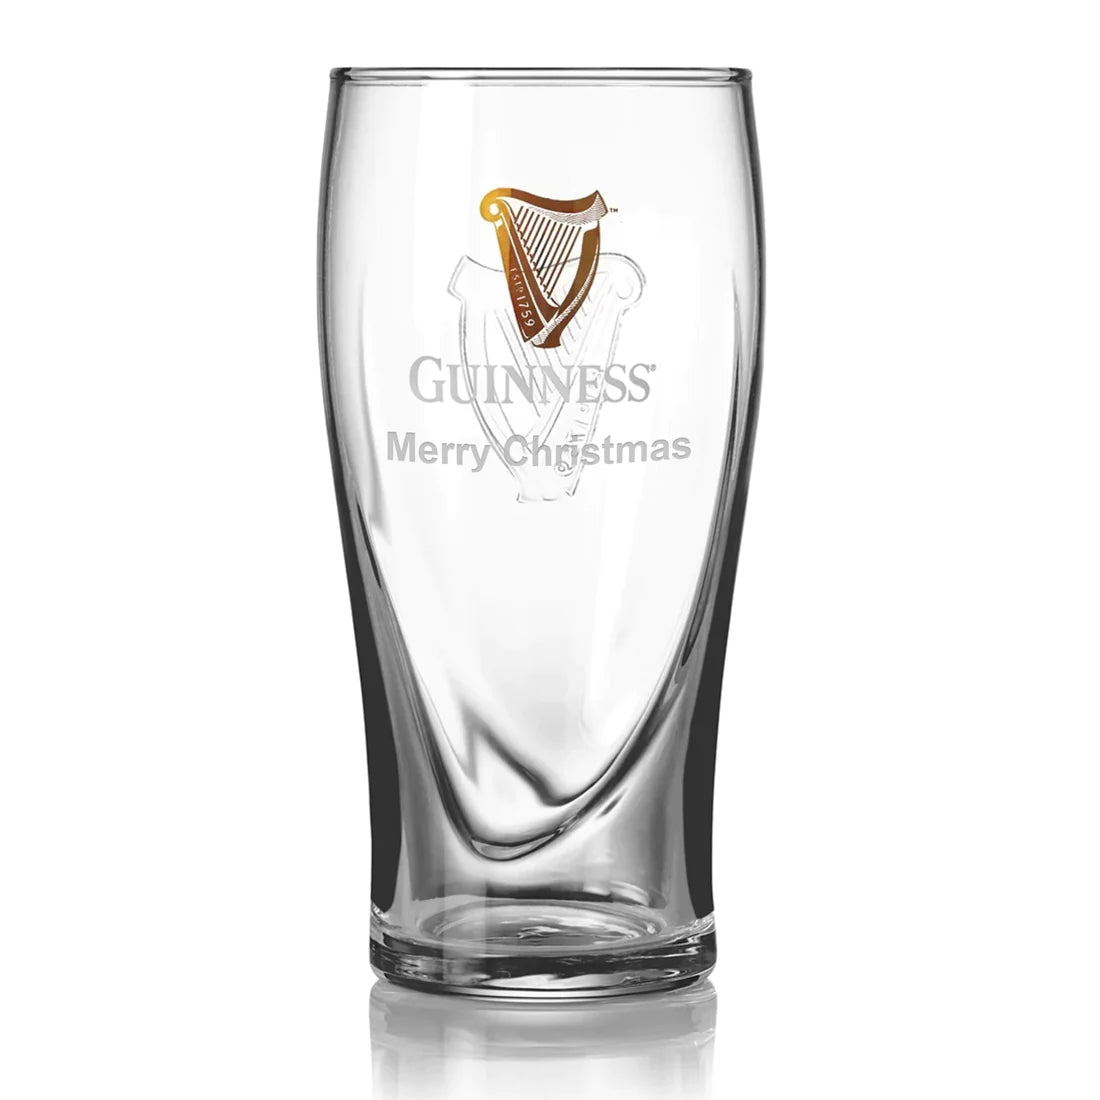 Replace with: Guinness Pint Glass by Guinness